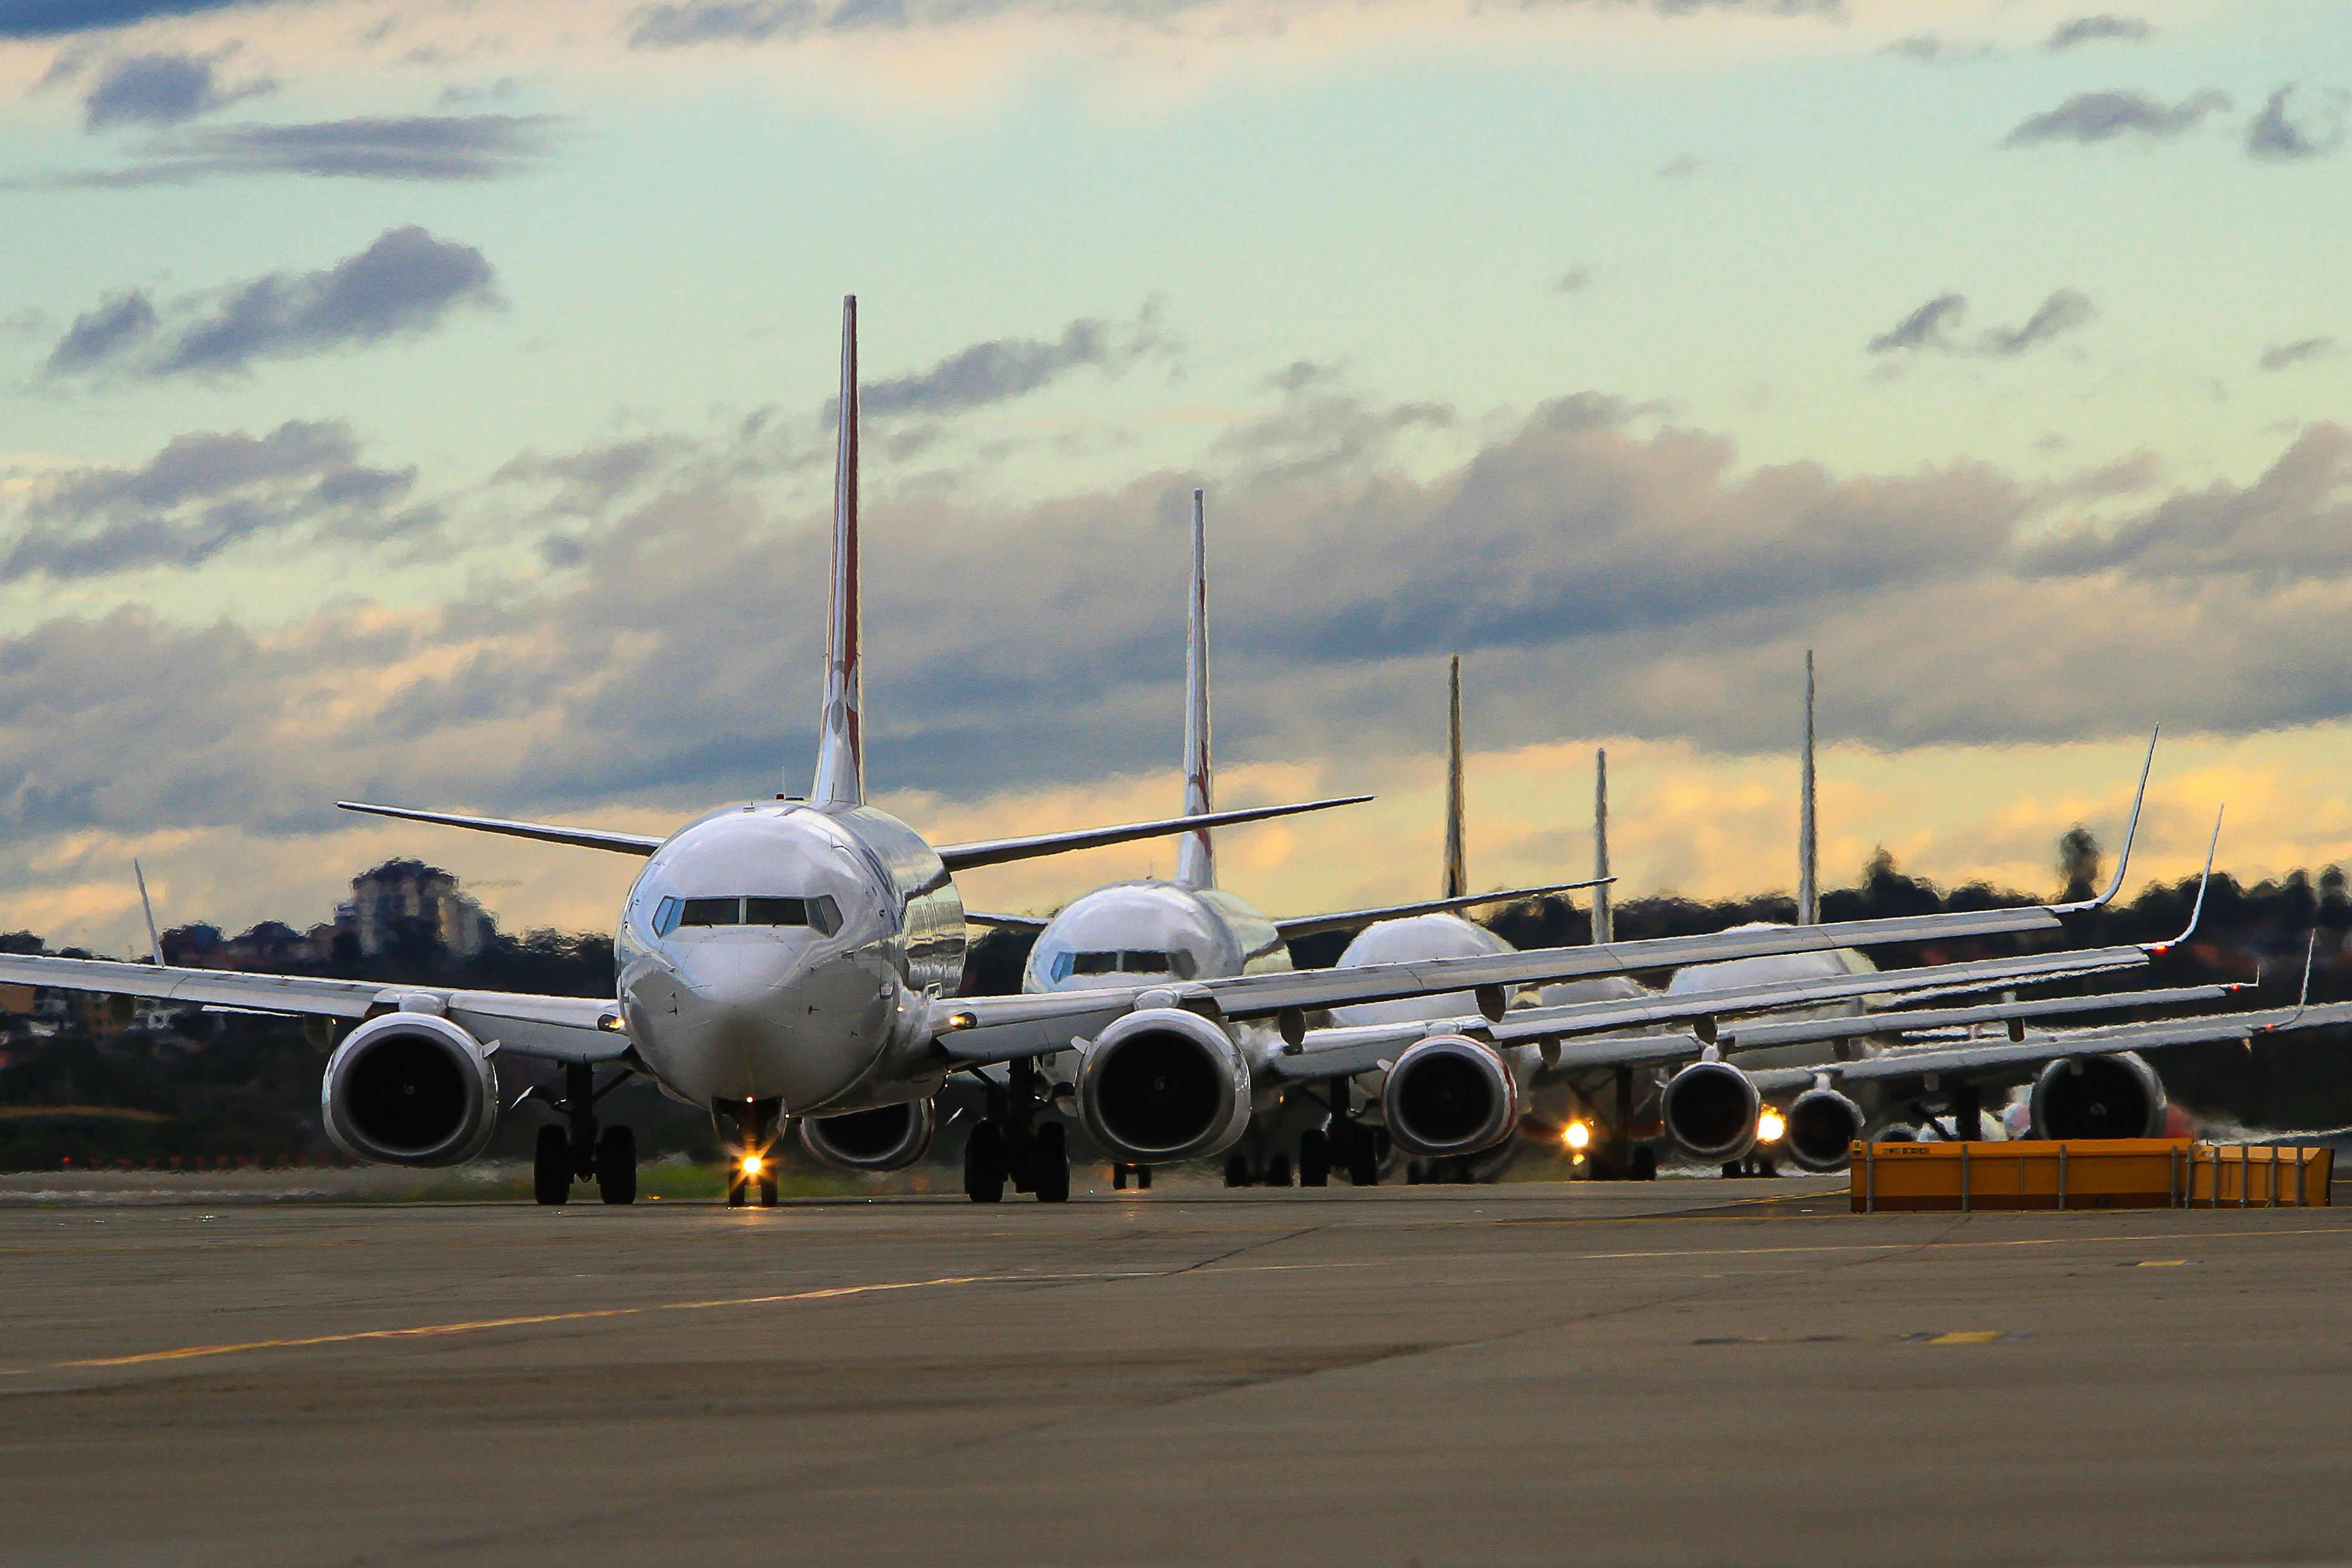 Airplanes lined up at dusk on runway.